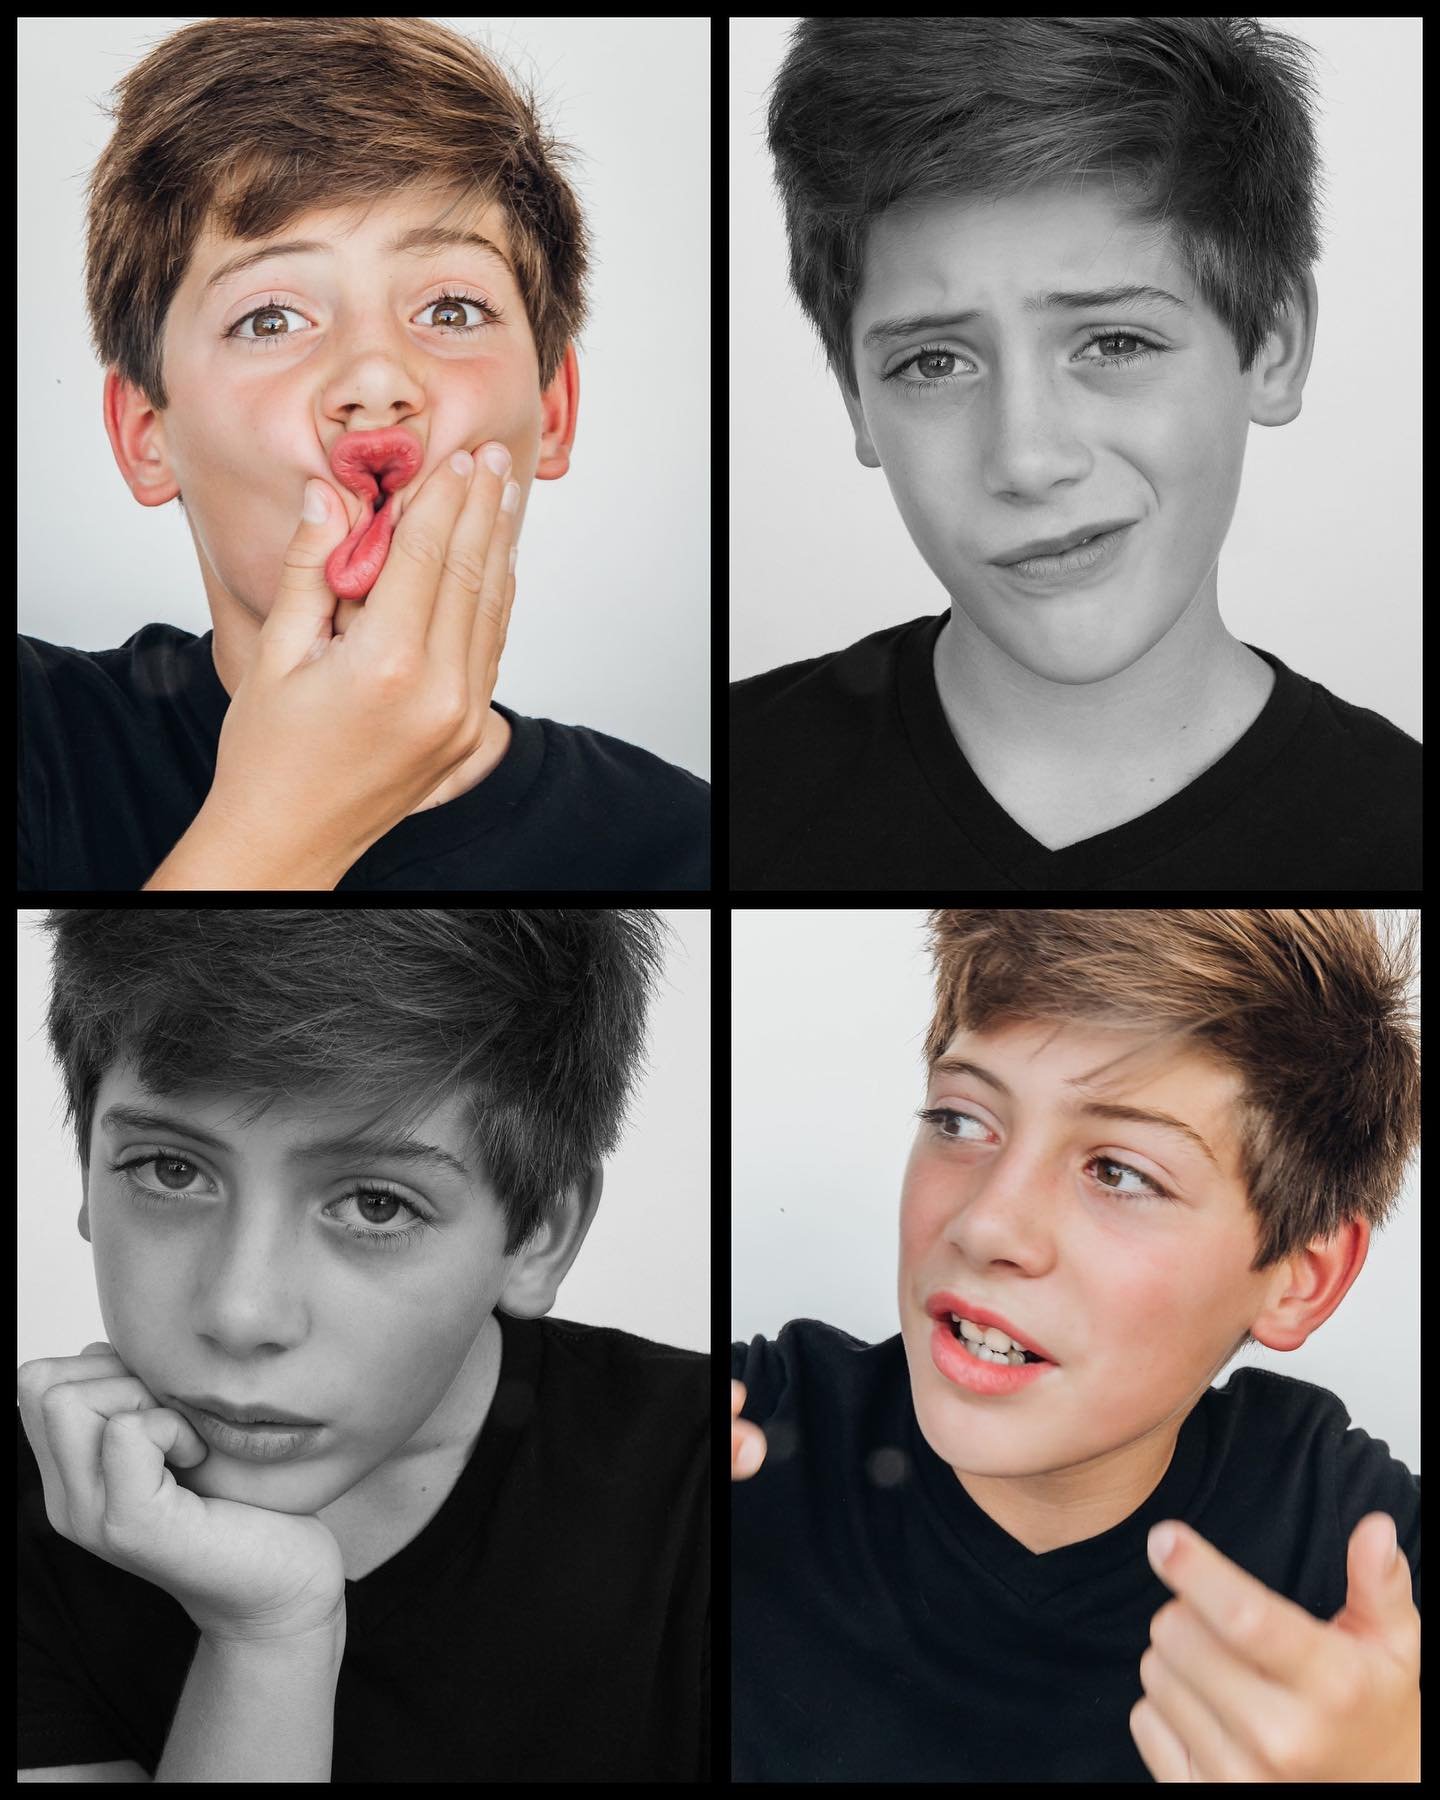 Such a fun &amp; funny guy! We love Rhett&rsquo;s personality! 🤩 To work with Rhett contact laura@jeamodels.com or visit www.jeamodels.com. #jeakids 

Photos by @ansleycrabtree